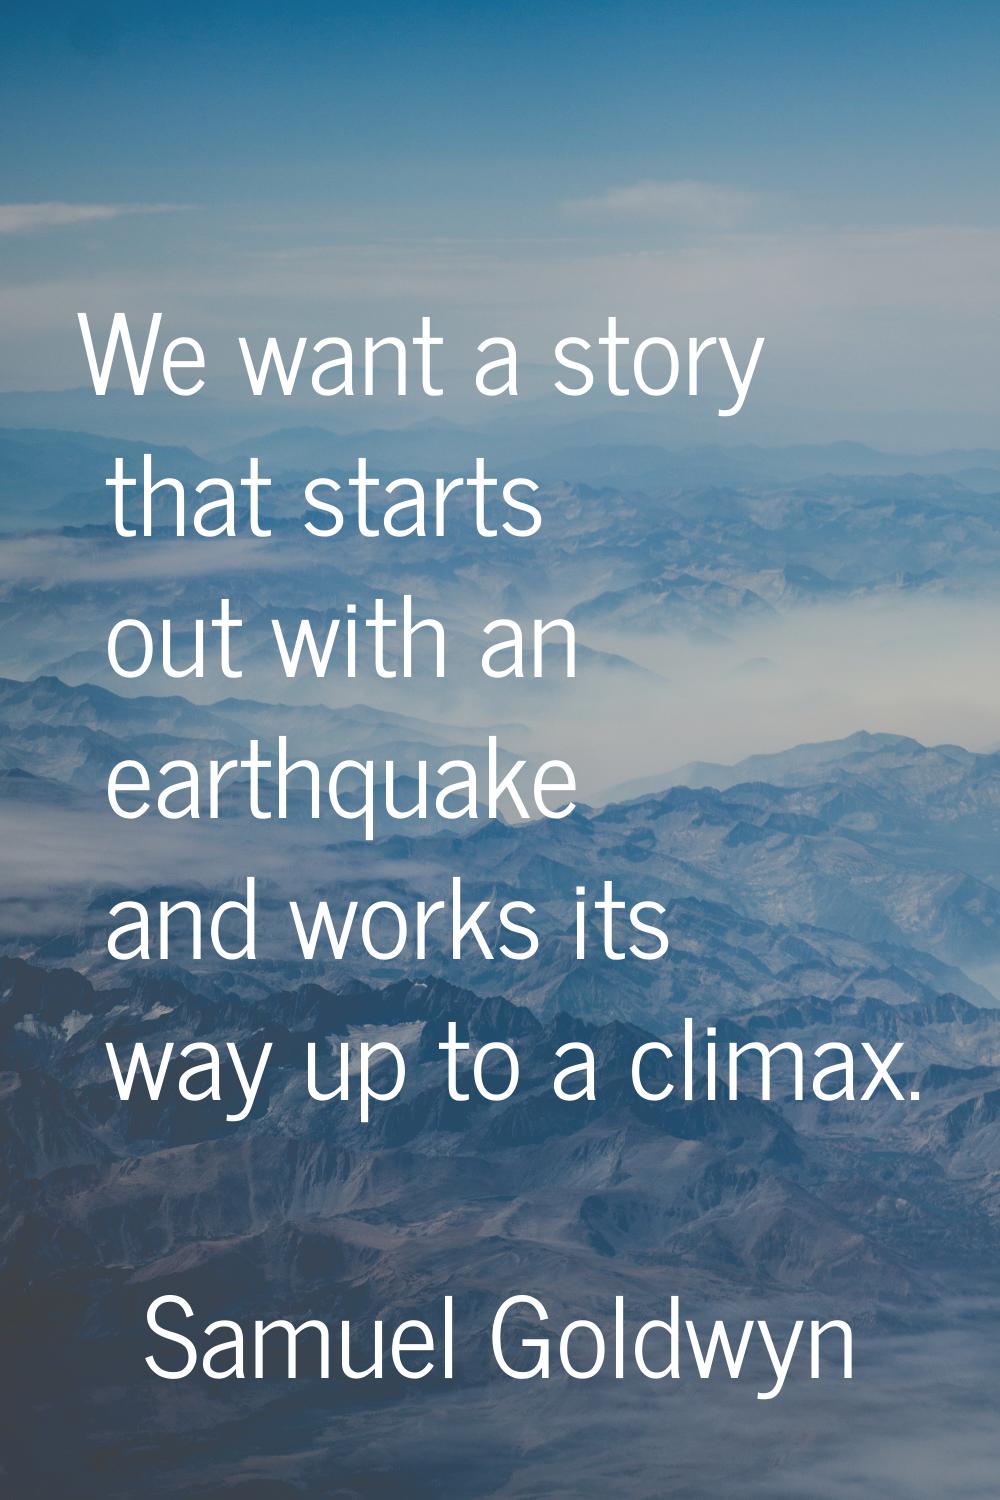 We want a story that starts out with an earthquake and works its way up to a climax.